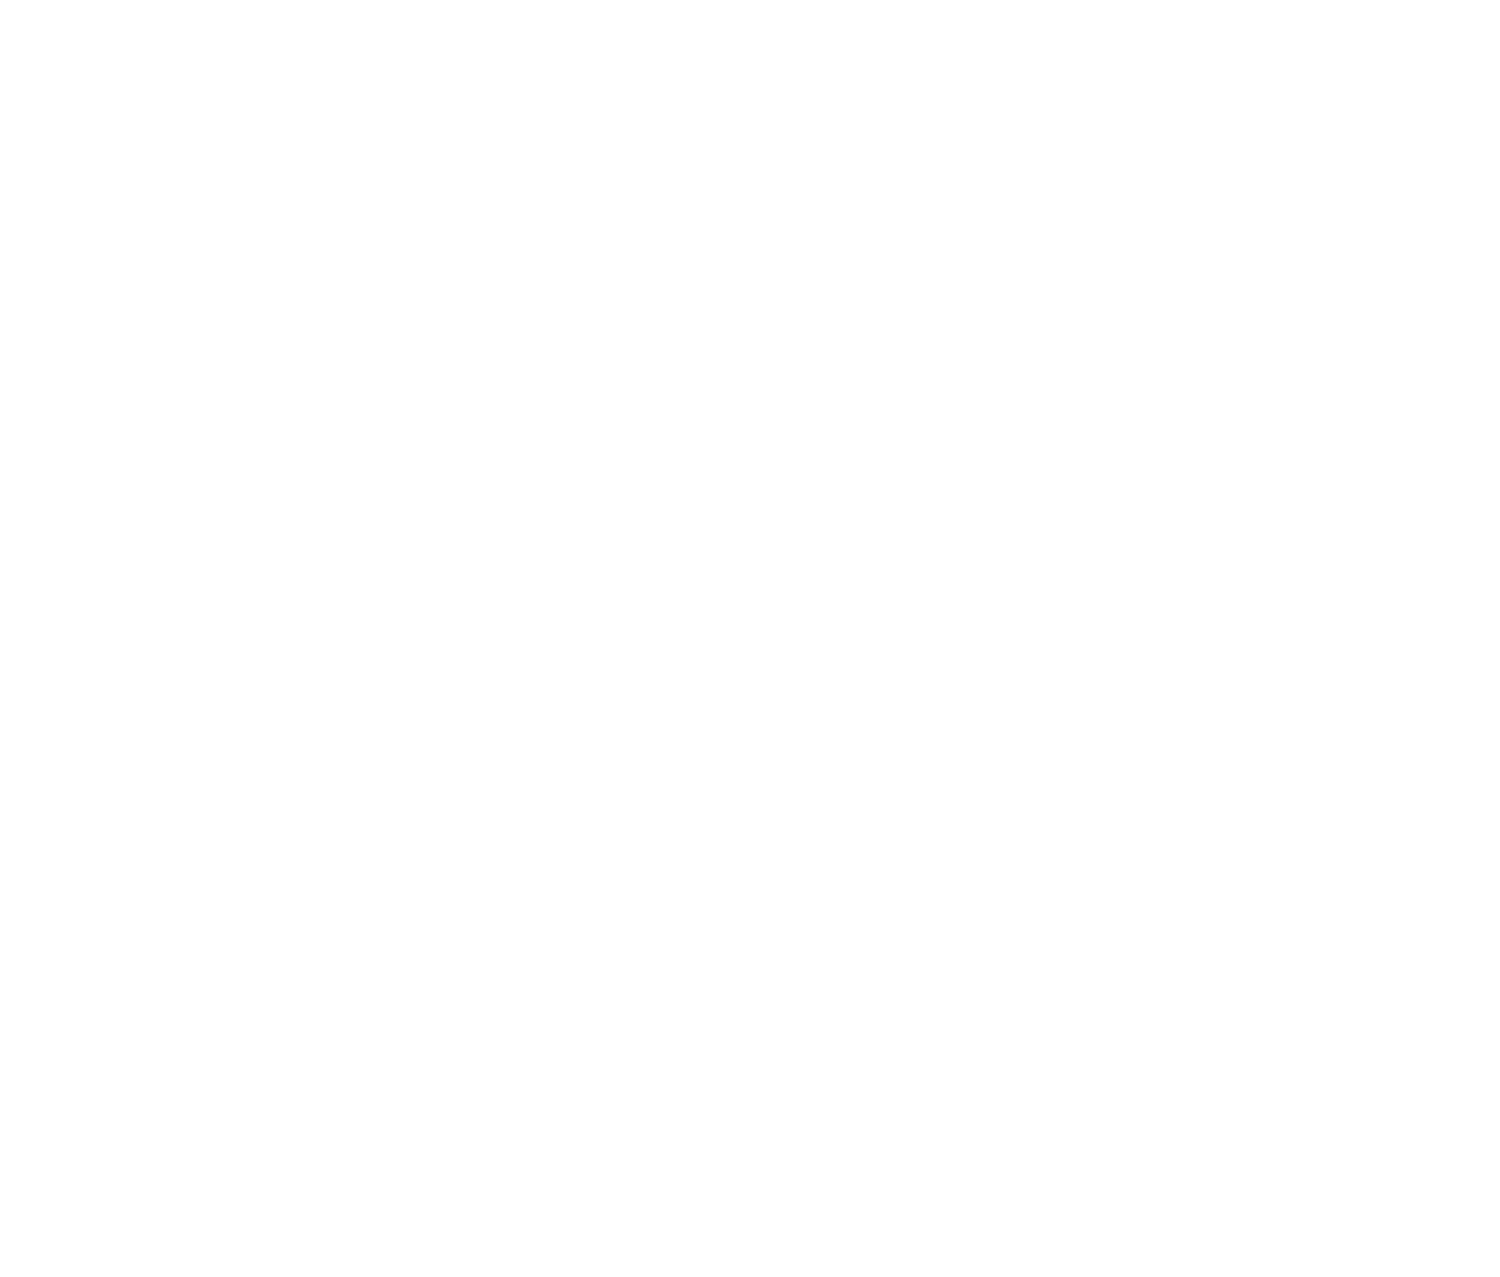 The Edible Story